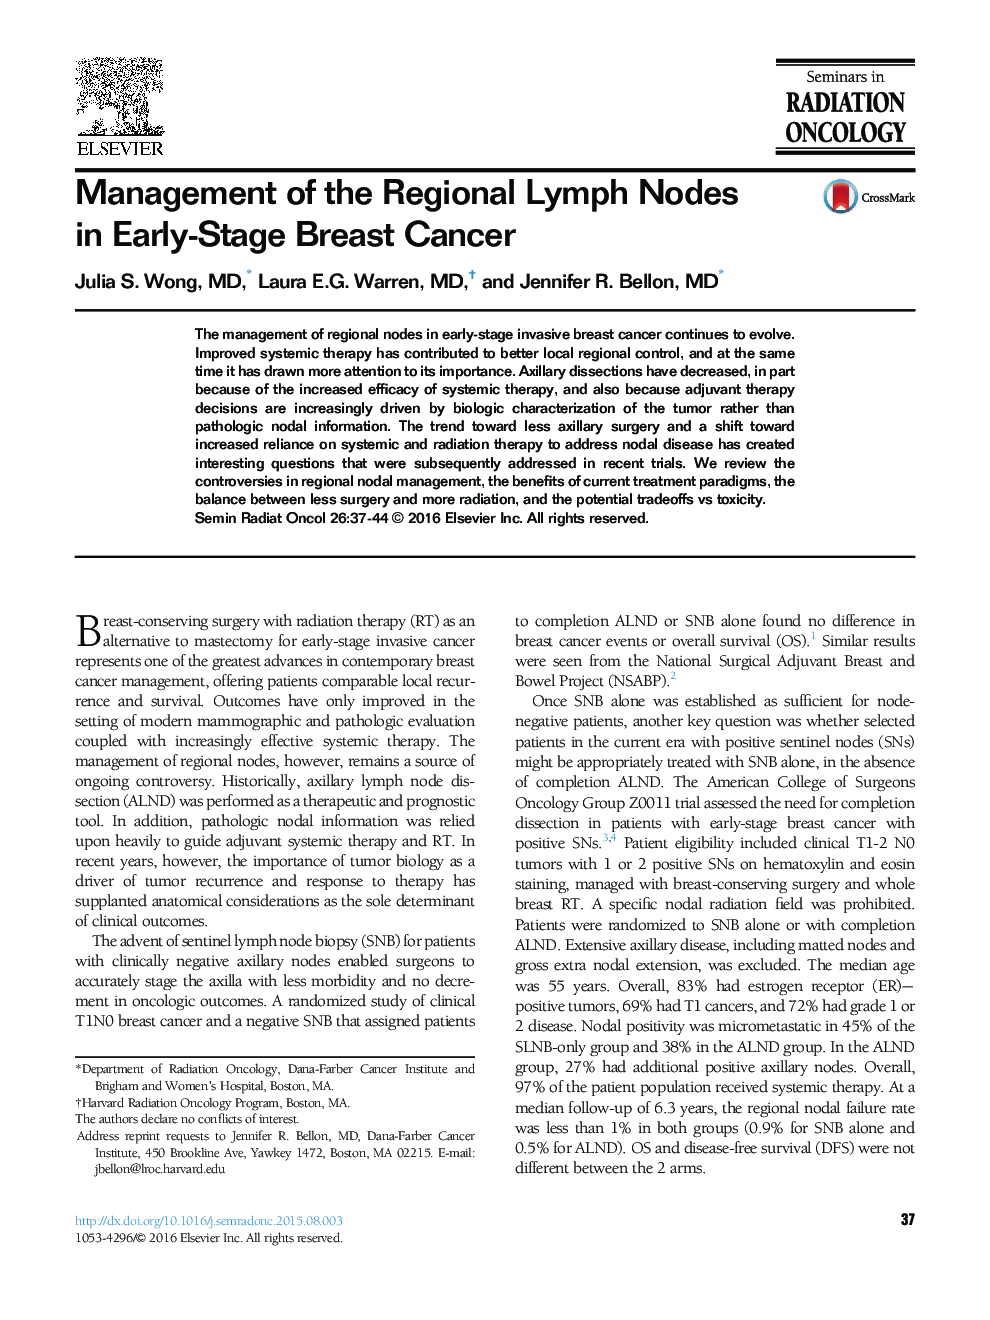 Management of the Regional Lymph Nodes in Early-Stage Breast Cancer 